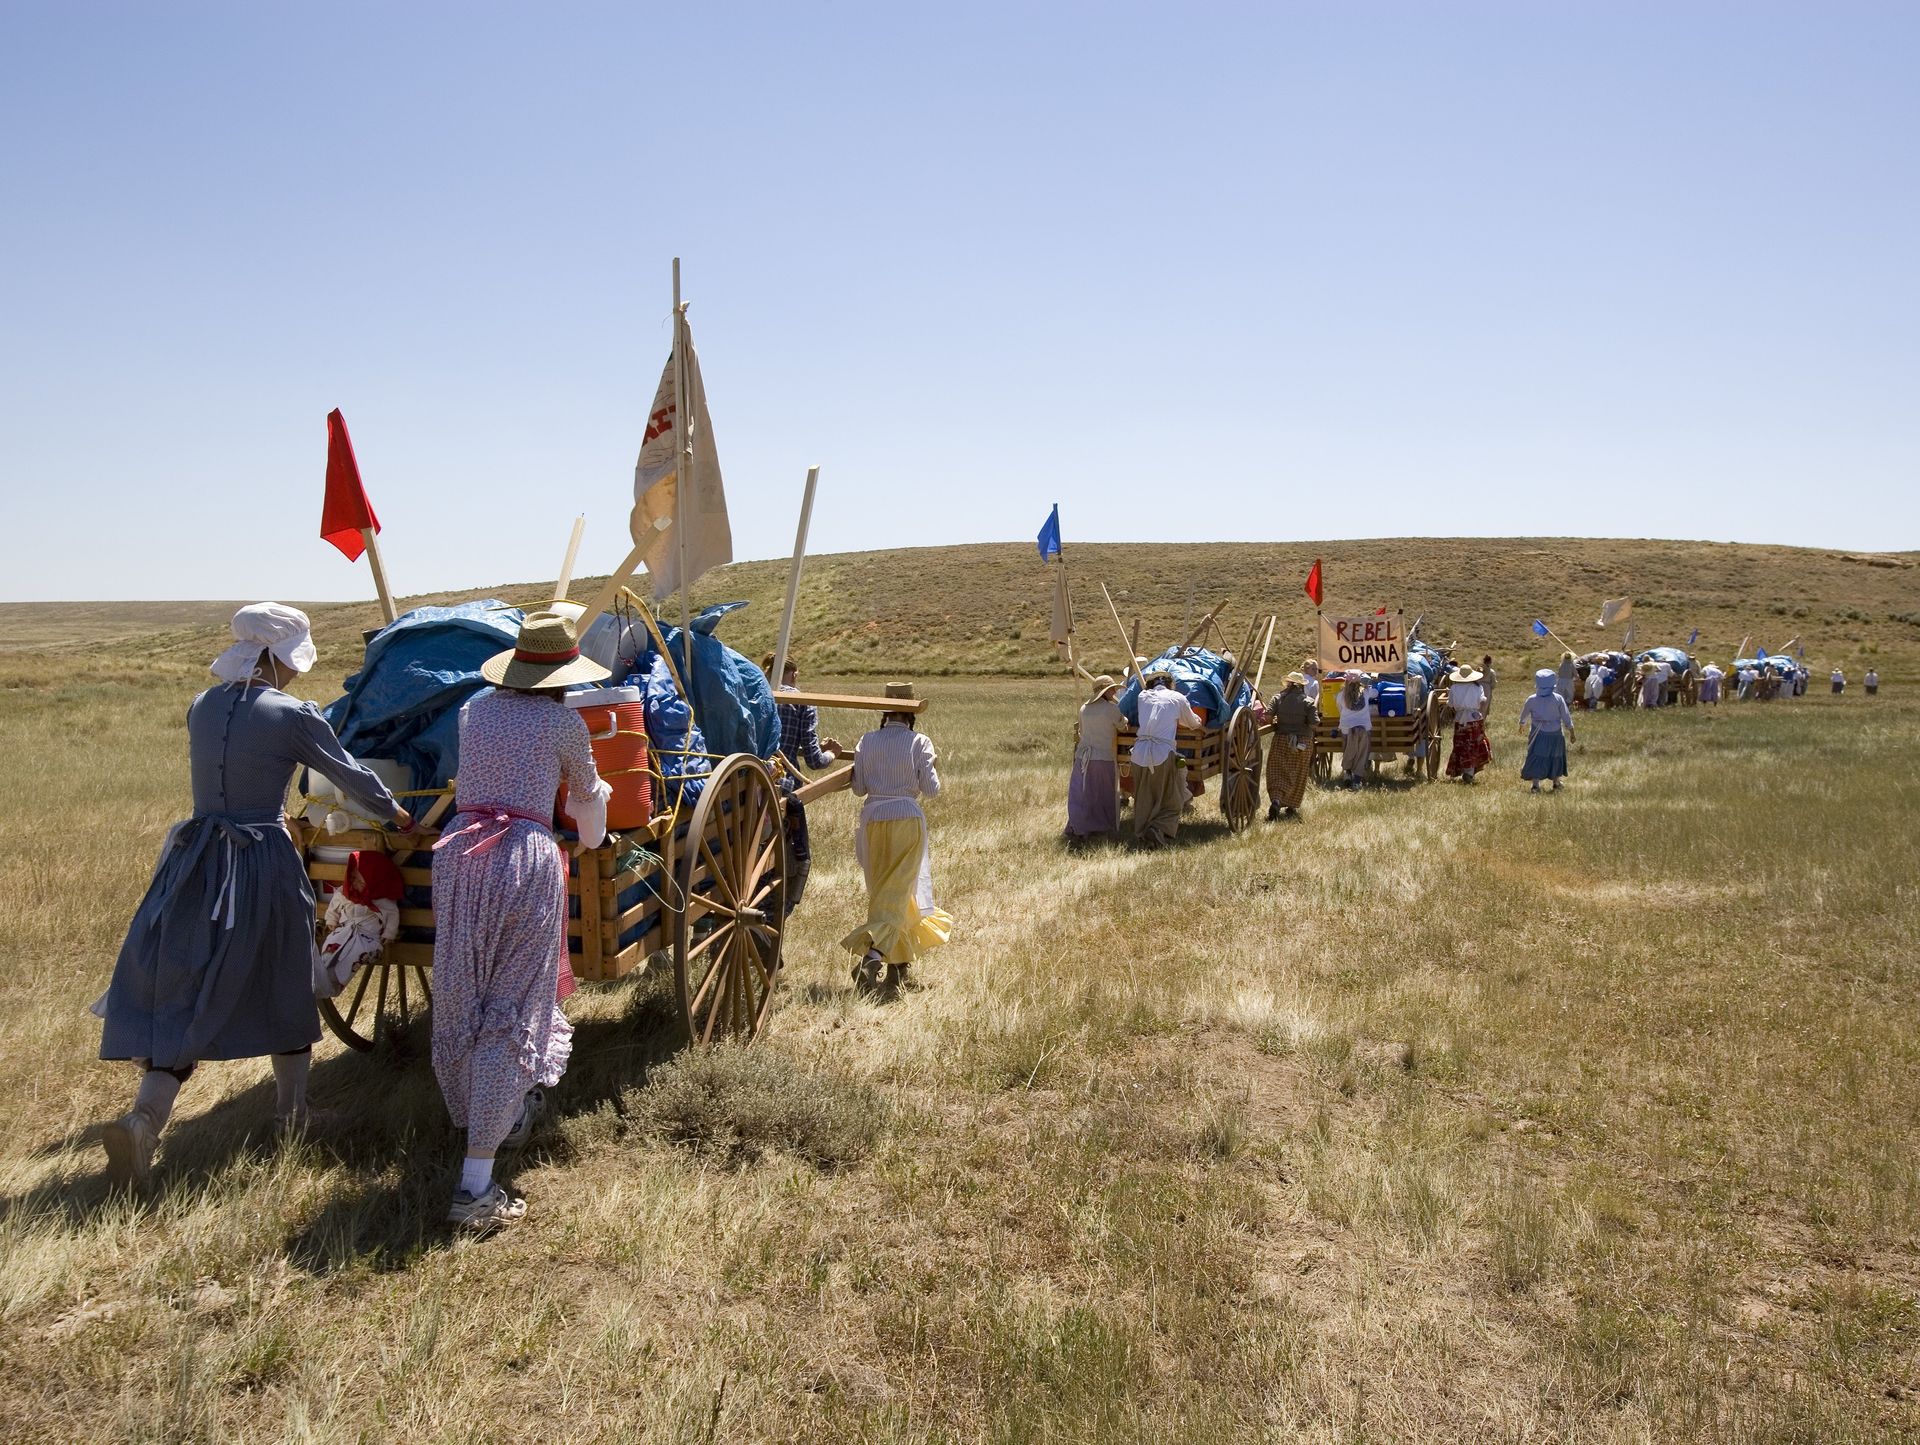 Young men and young women dressed in pioneer clothing push handcarts through a field and fly flags during trek.